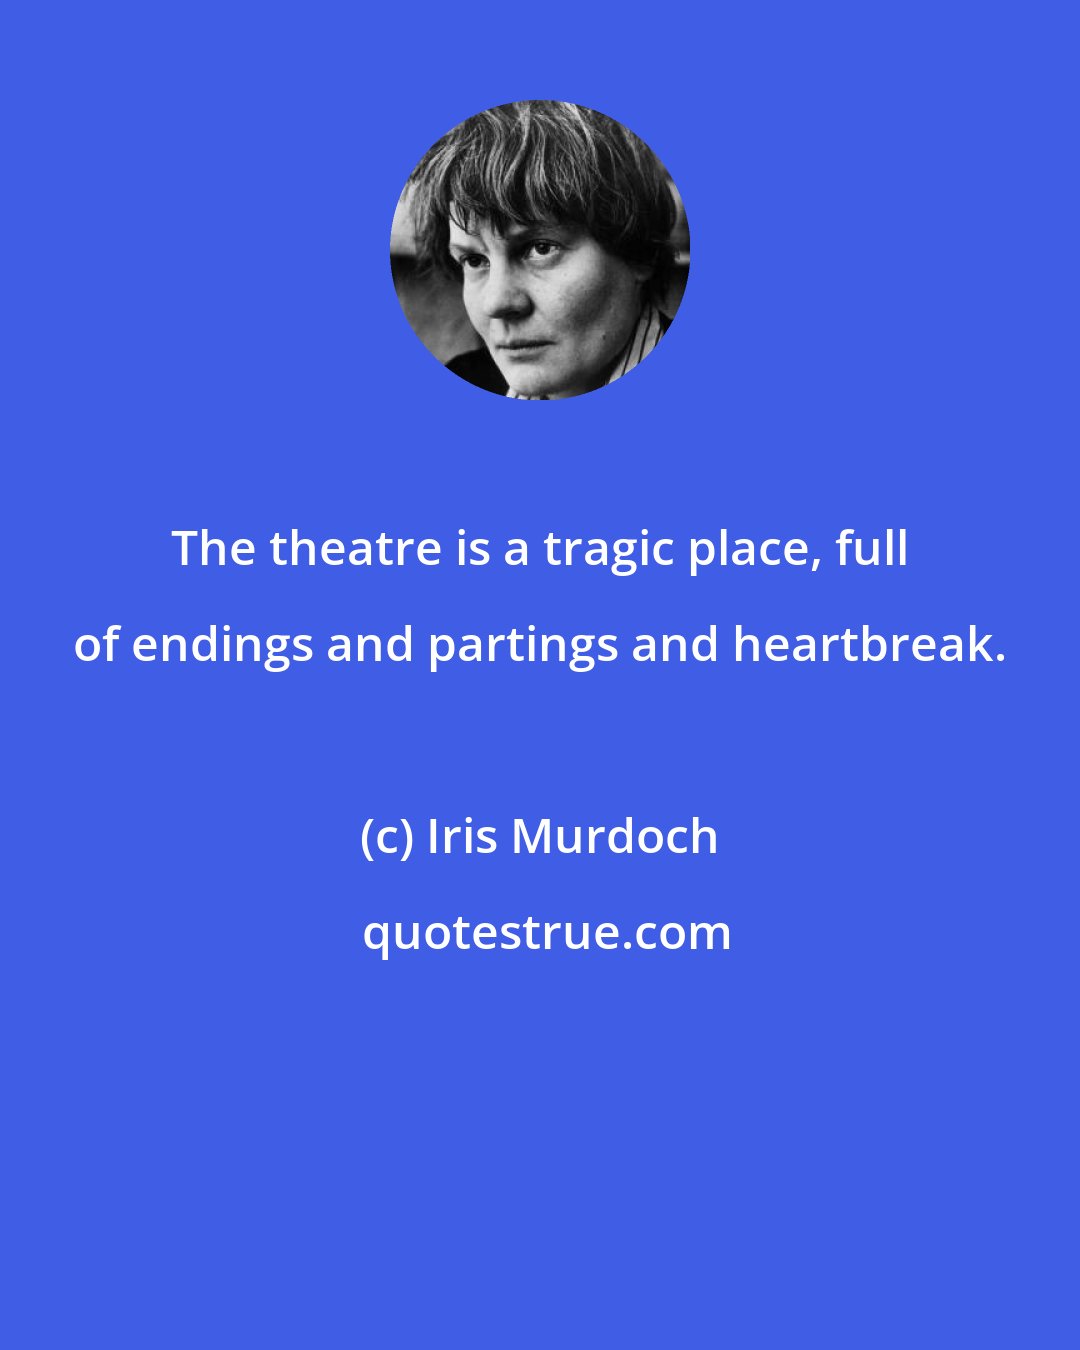 Iris Murdoch: The theatre is a tragic place, full of endings and partings and heartbreak.